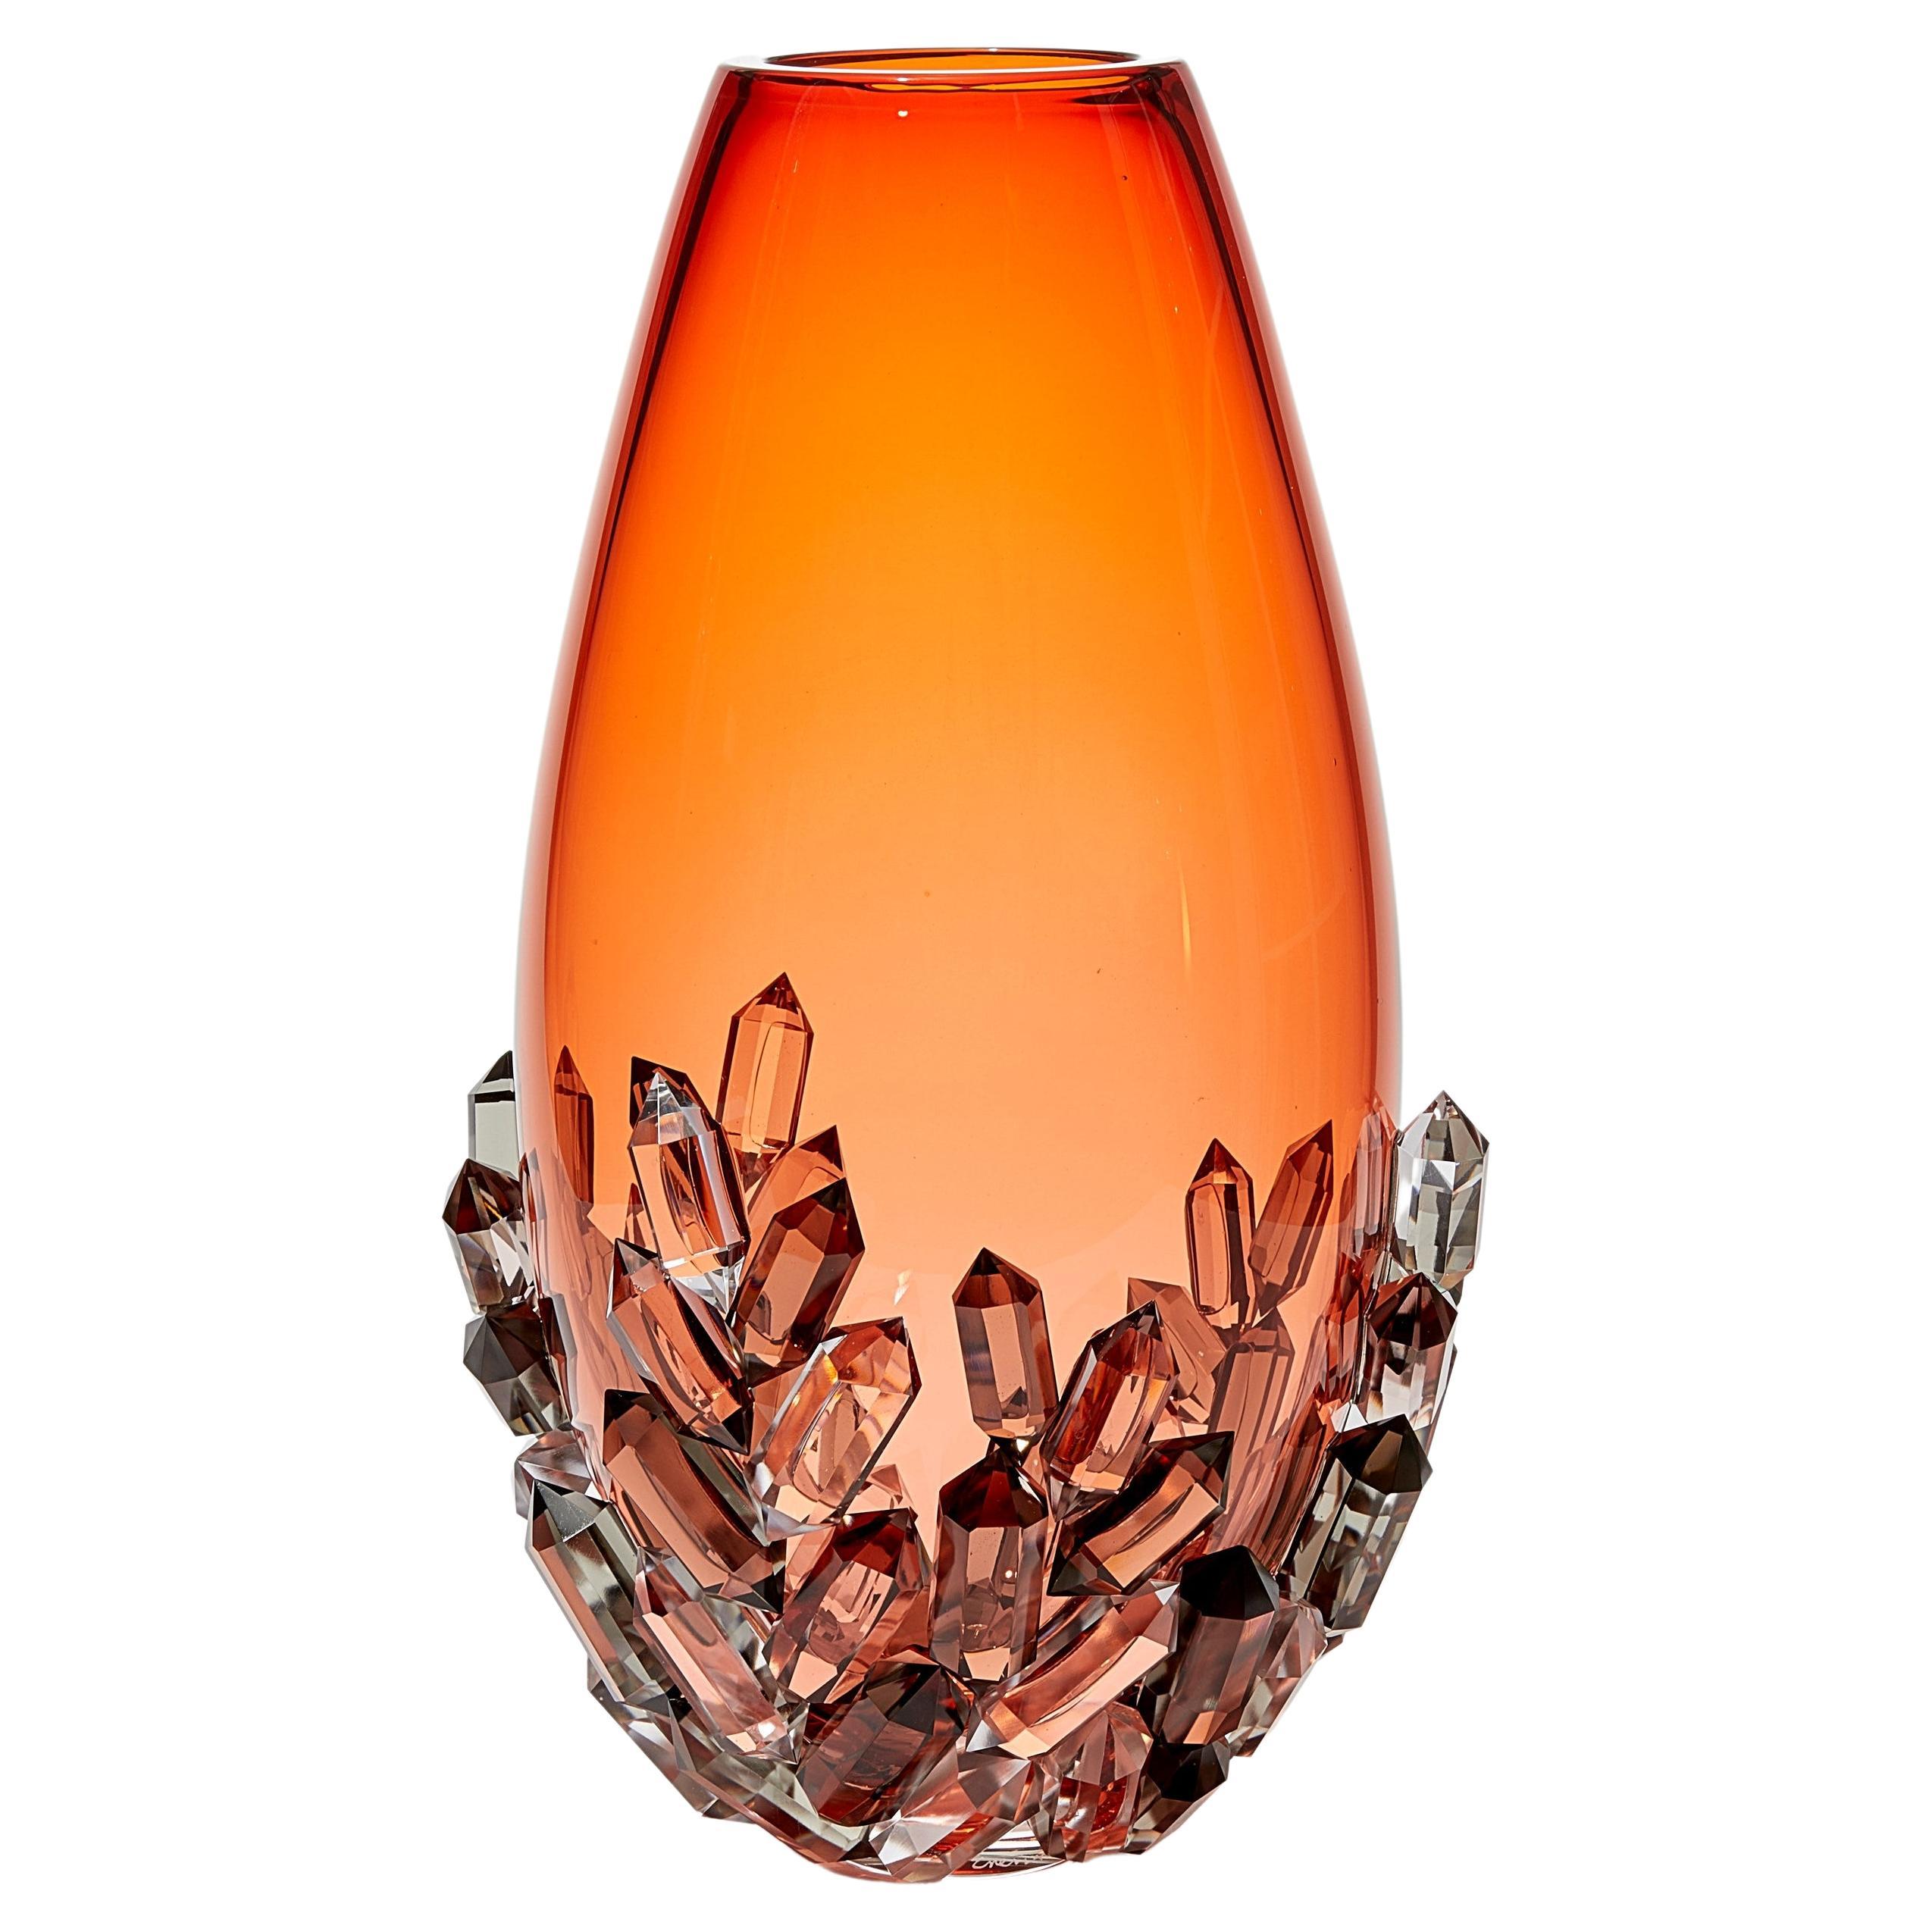 Cristallized Aurora, a peach glass vase with cut crystals by Hanne Enemark For Sale